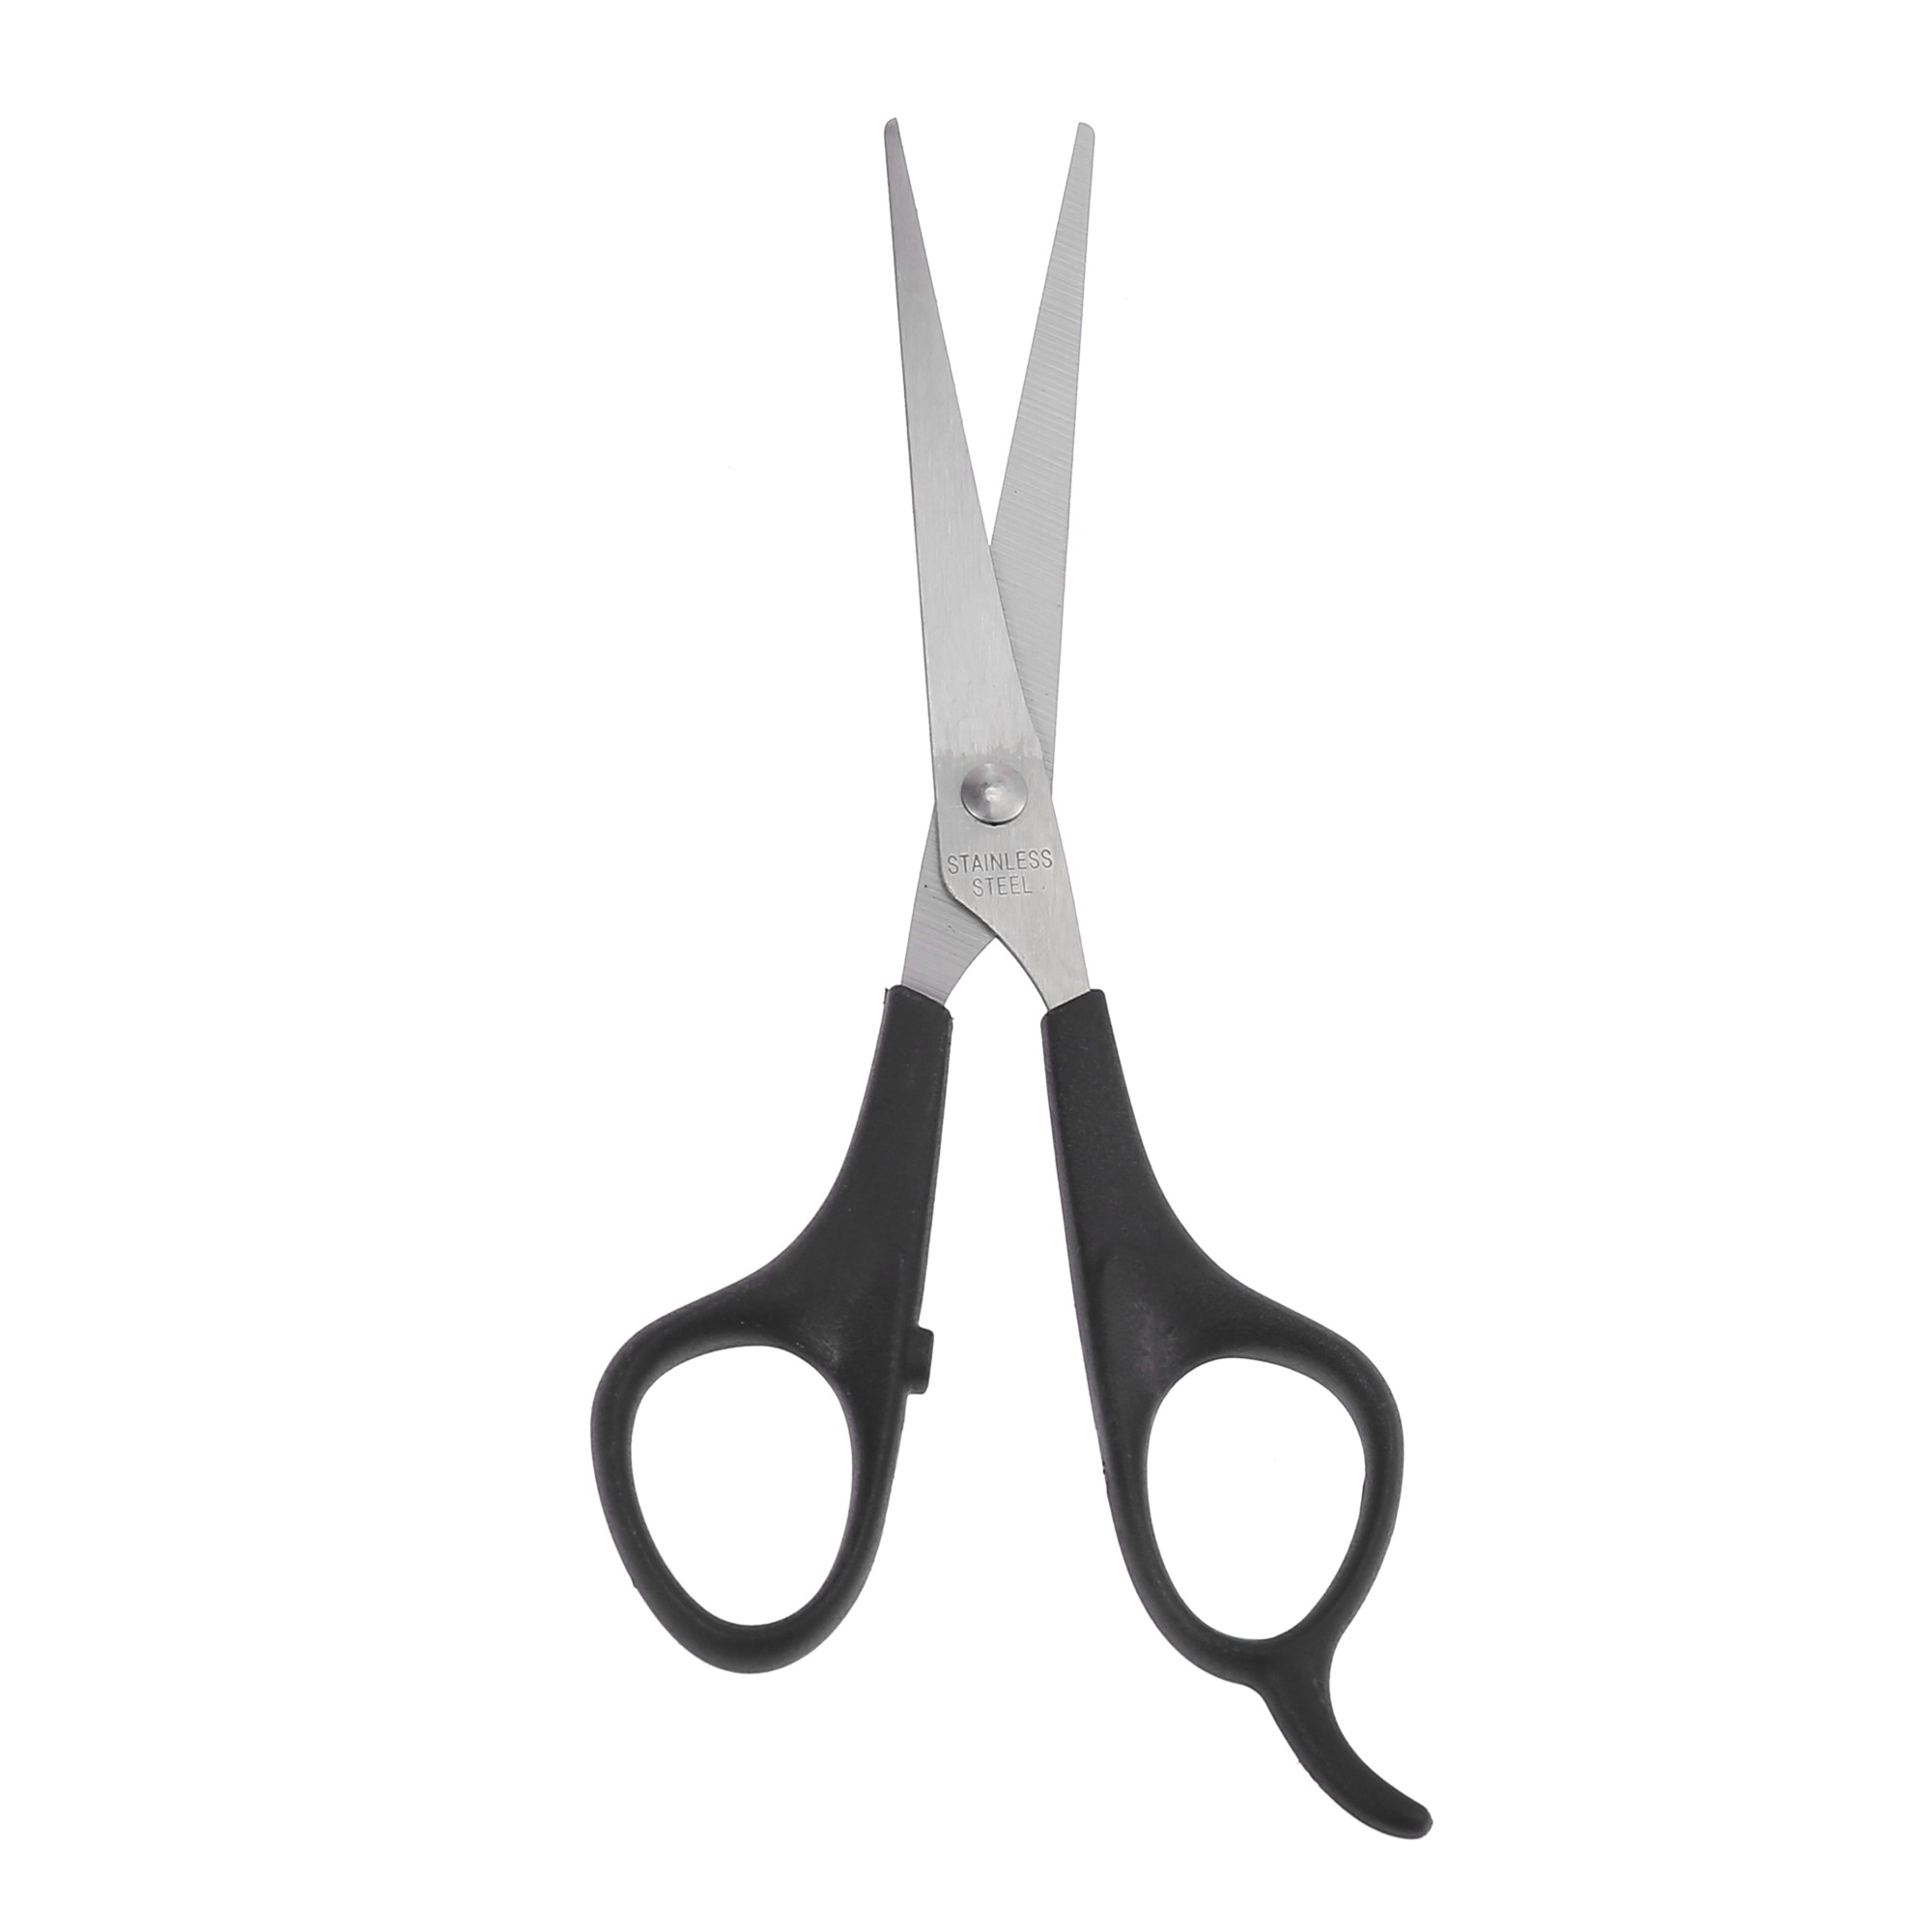 Unique Bargains Stainless Steel 6 Inch Straight Scissors for Long Short Thick Hard Soft Hair for Men Women Silver Tone